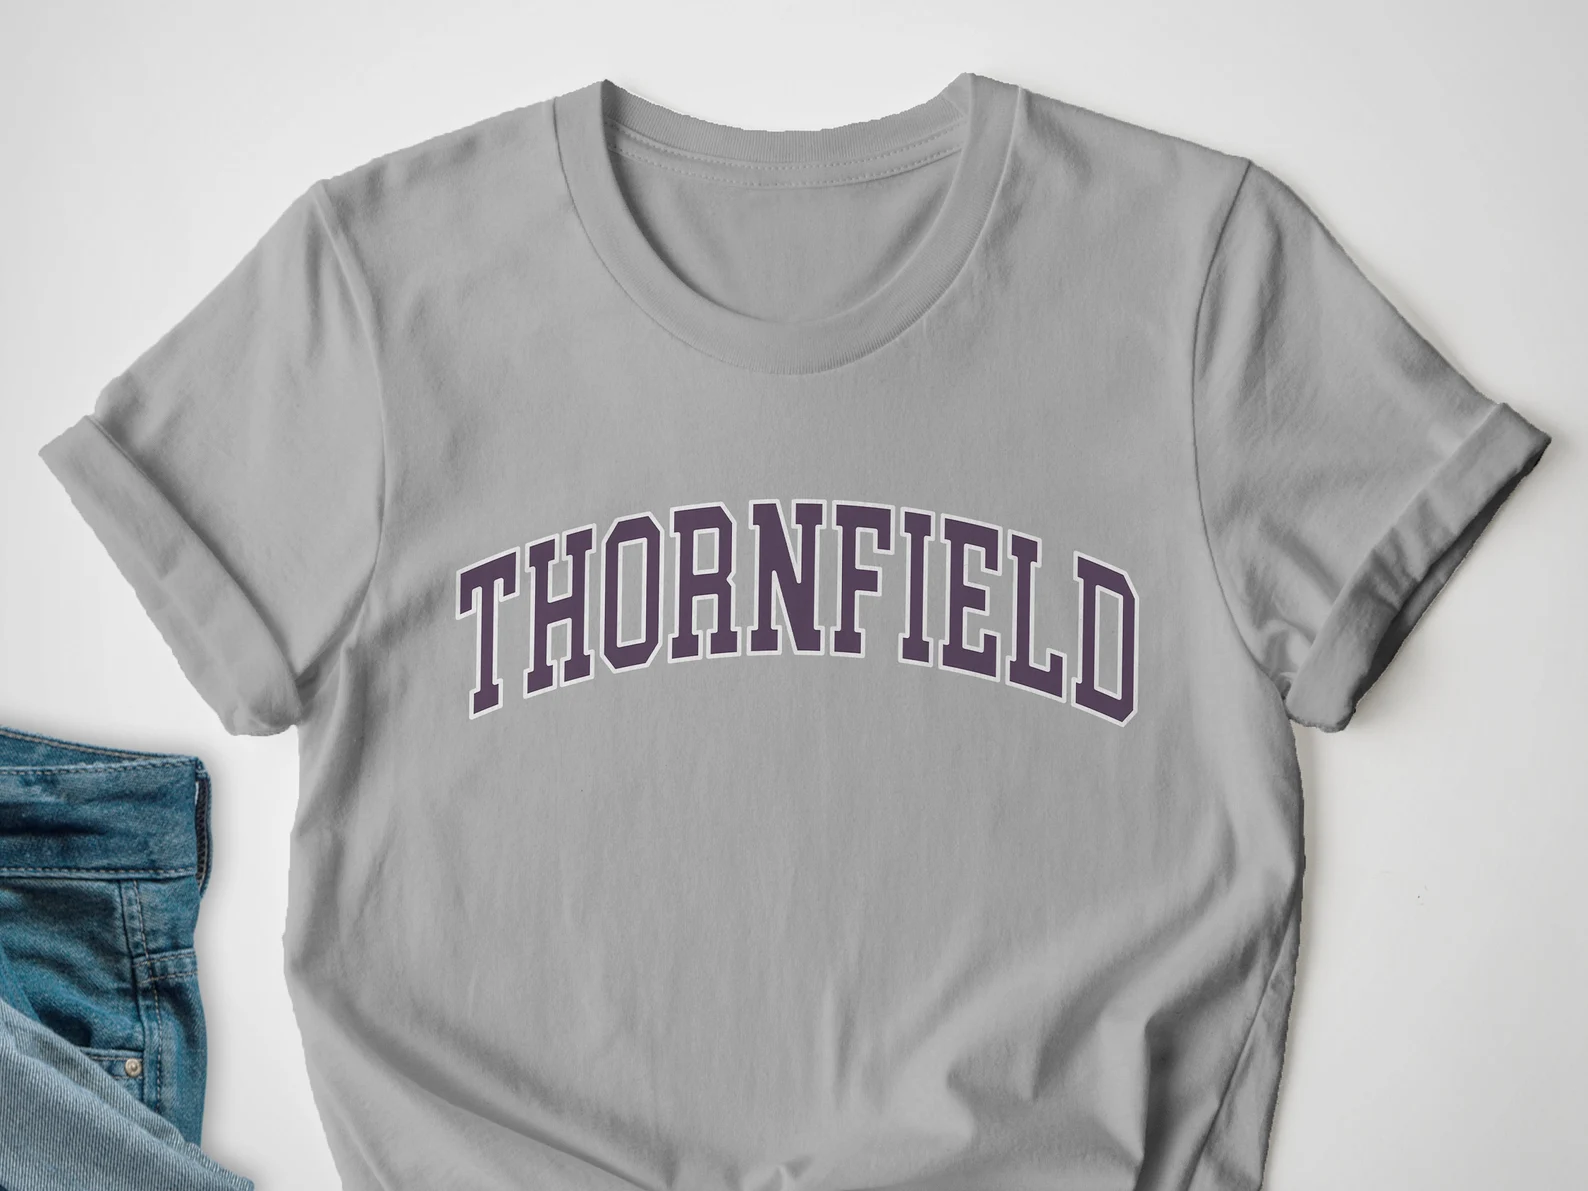 a grey t-shirt with purple all-caps text reading "Thornfield" in a font that looks like the shirt for a college